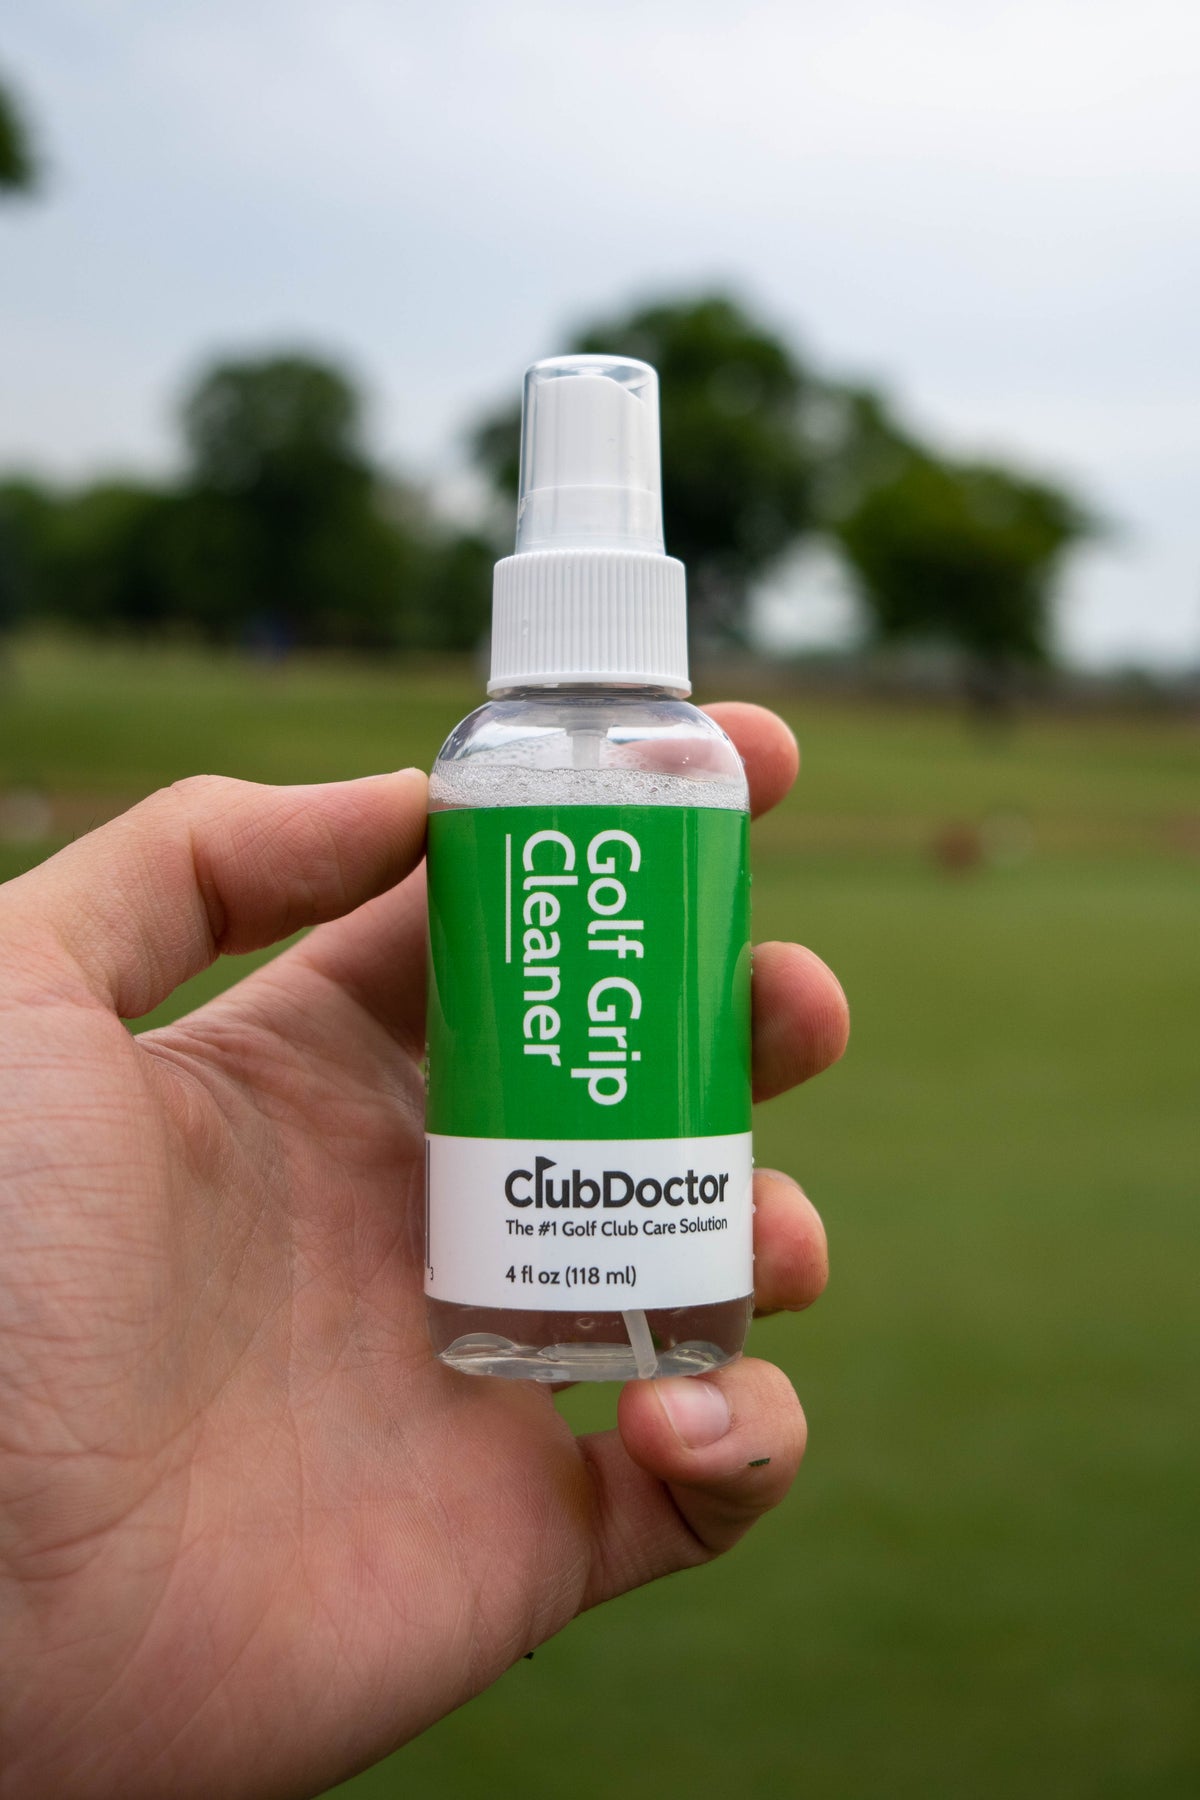 GRIPES Golf Grip Cleaning Wipes 